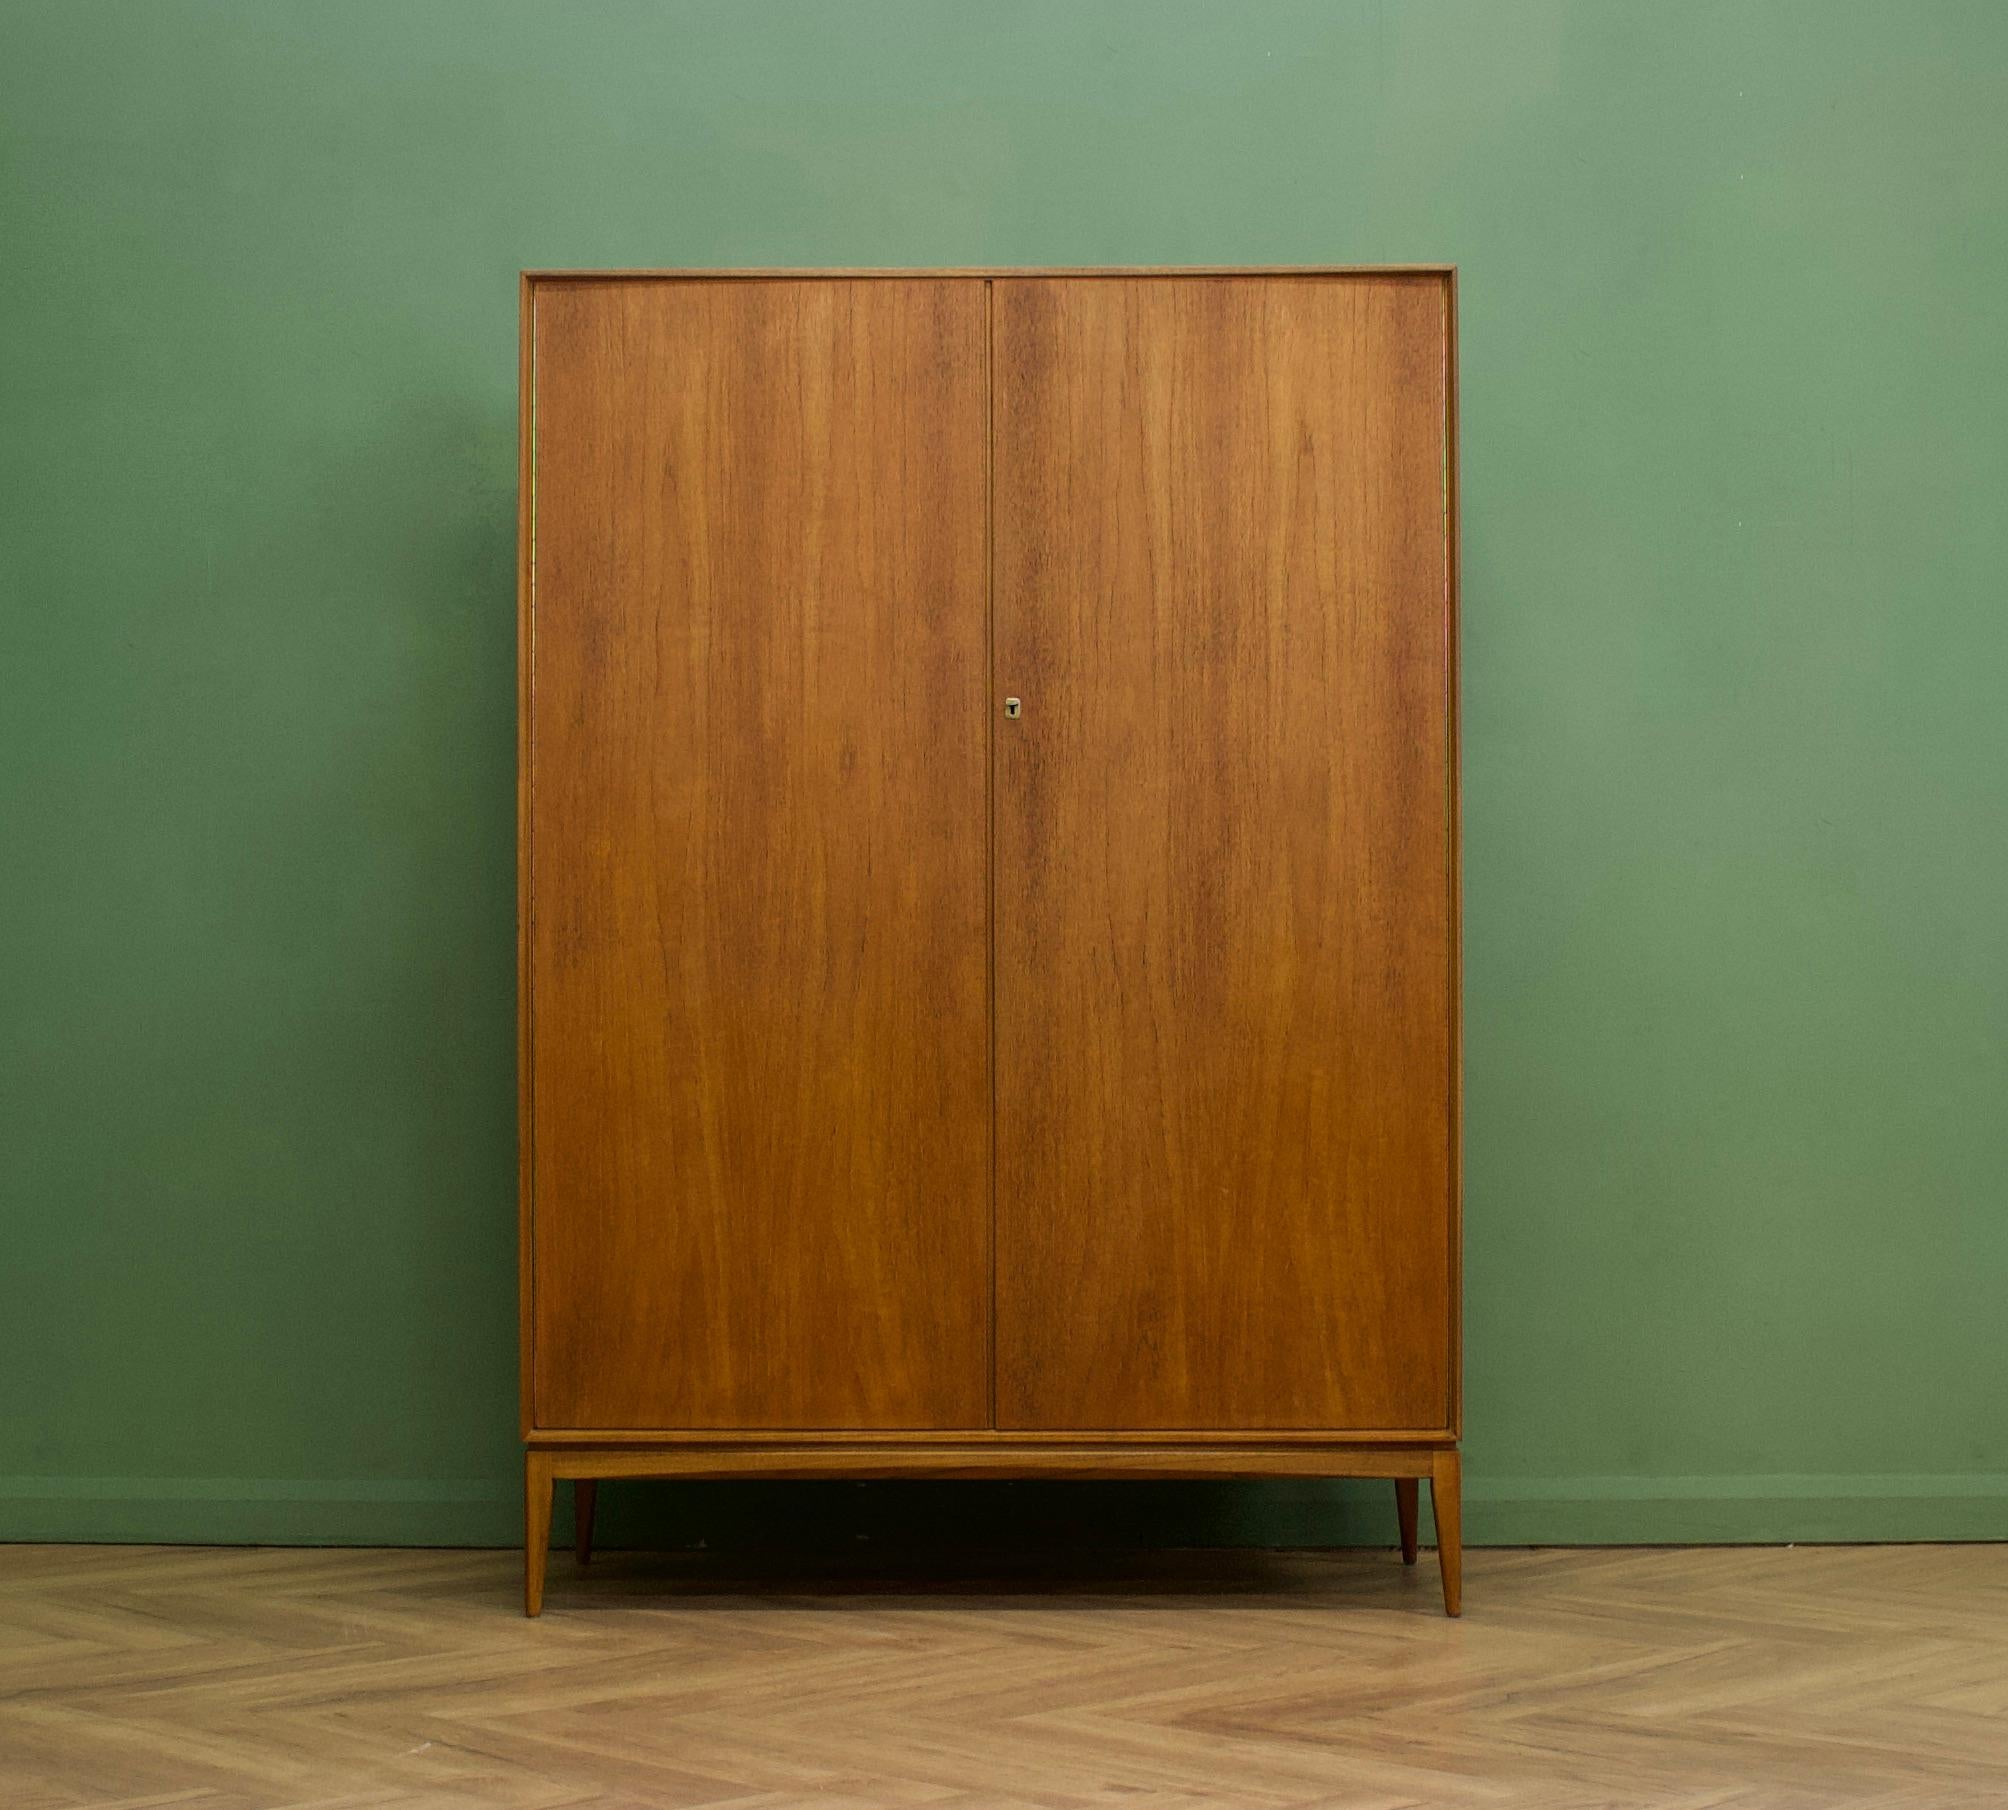 A freestanding double door teak wardrobe from McIntosh - in the Danish modern style Made during the 1960s Fitted out with two clothes rail and fixed shelving for ample storage
The style of this wardrobe is minimalist - with it's clean lines,